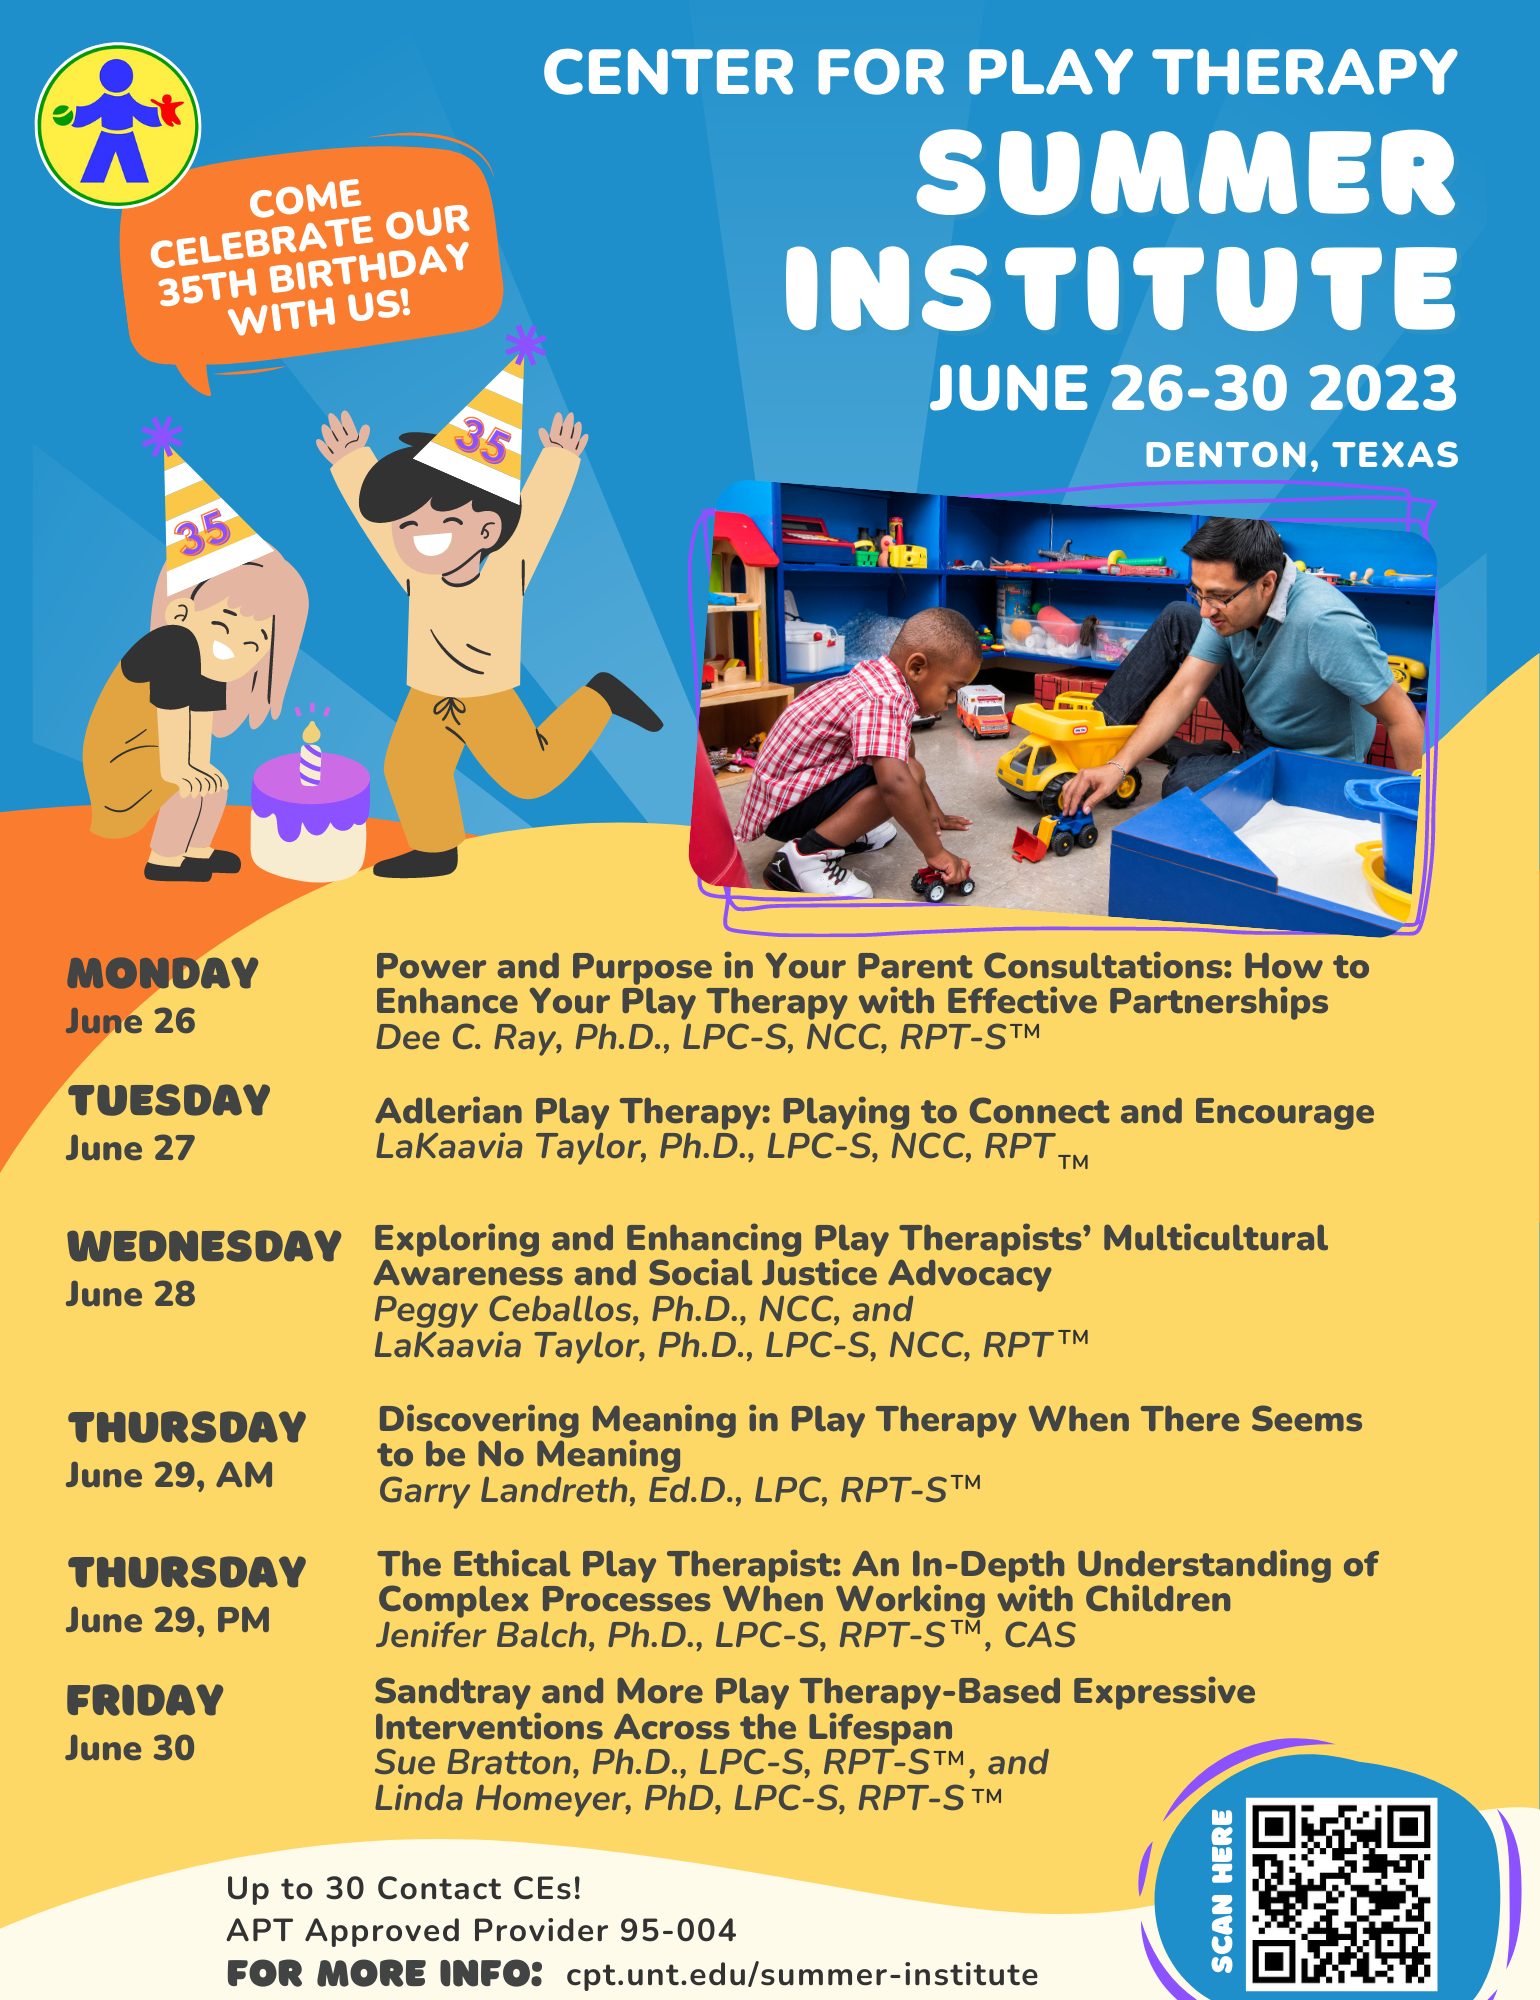 Summer Institute Center for Play Therapy